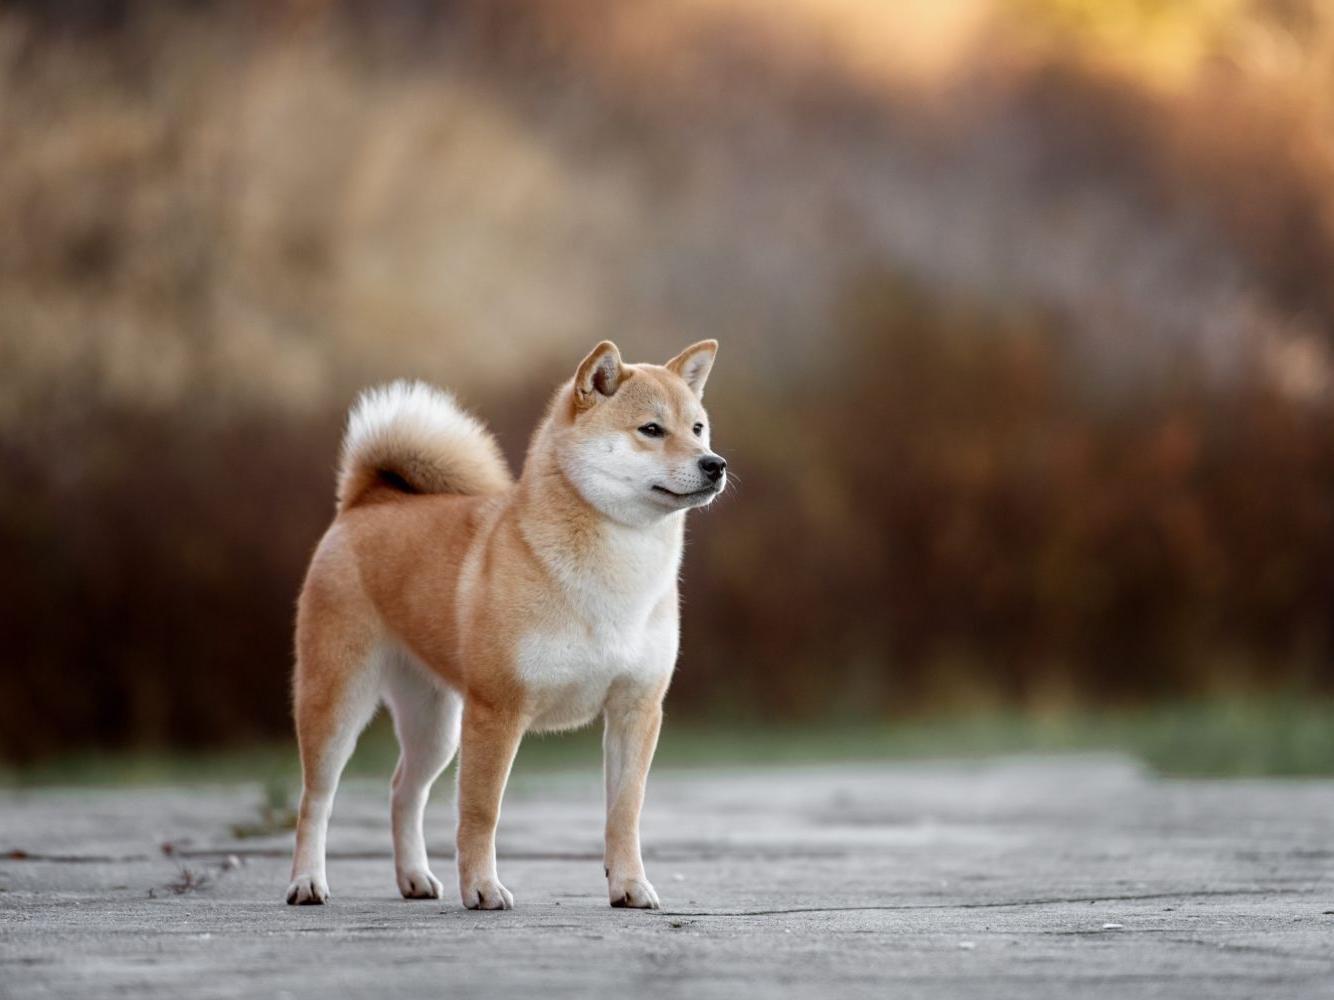 Eight Akita breeds were stolen in 2019, according to the figures.